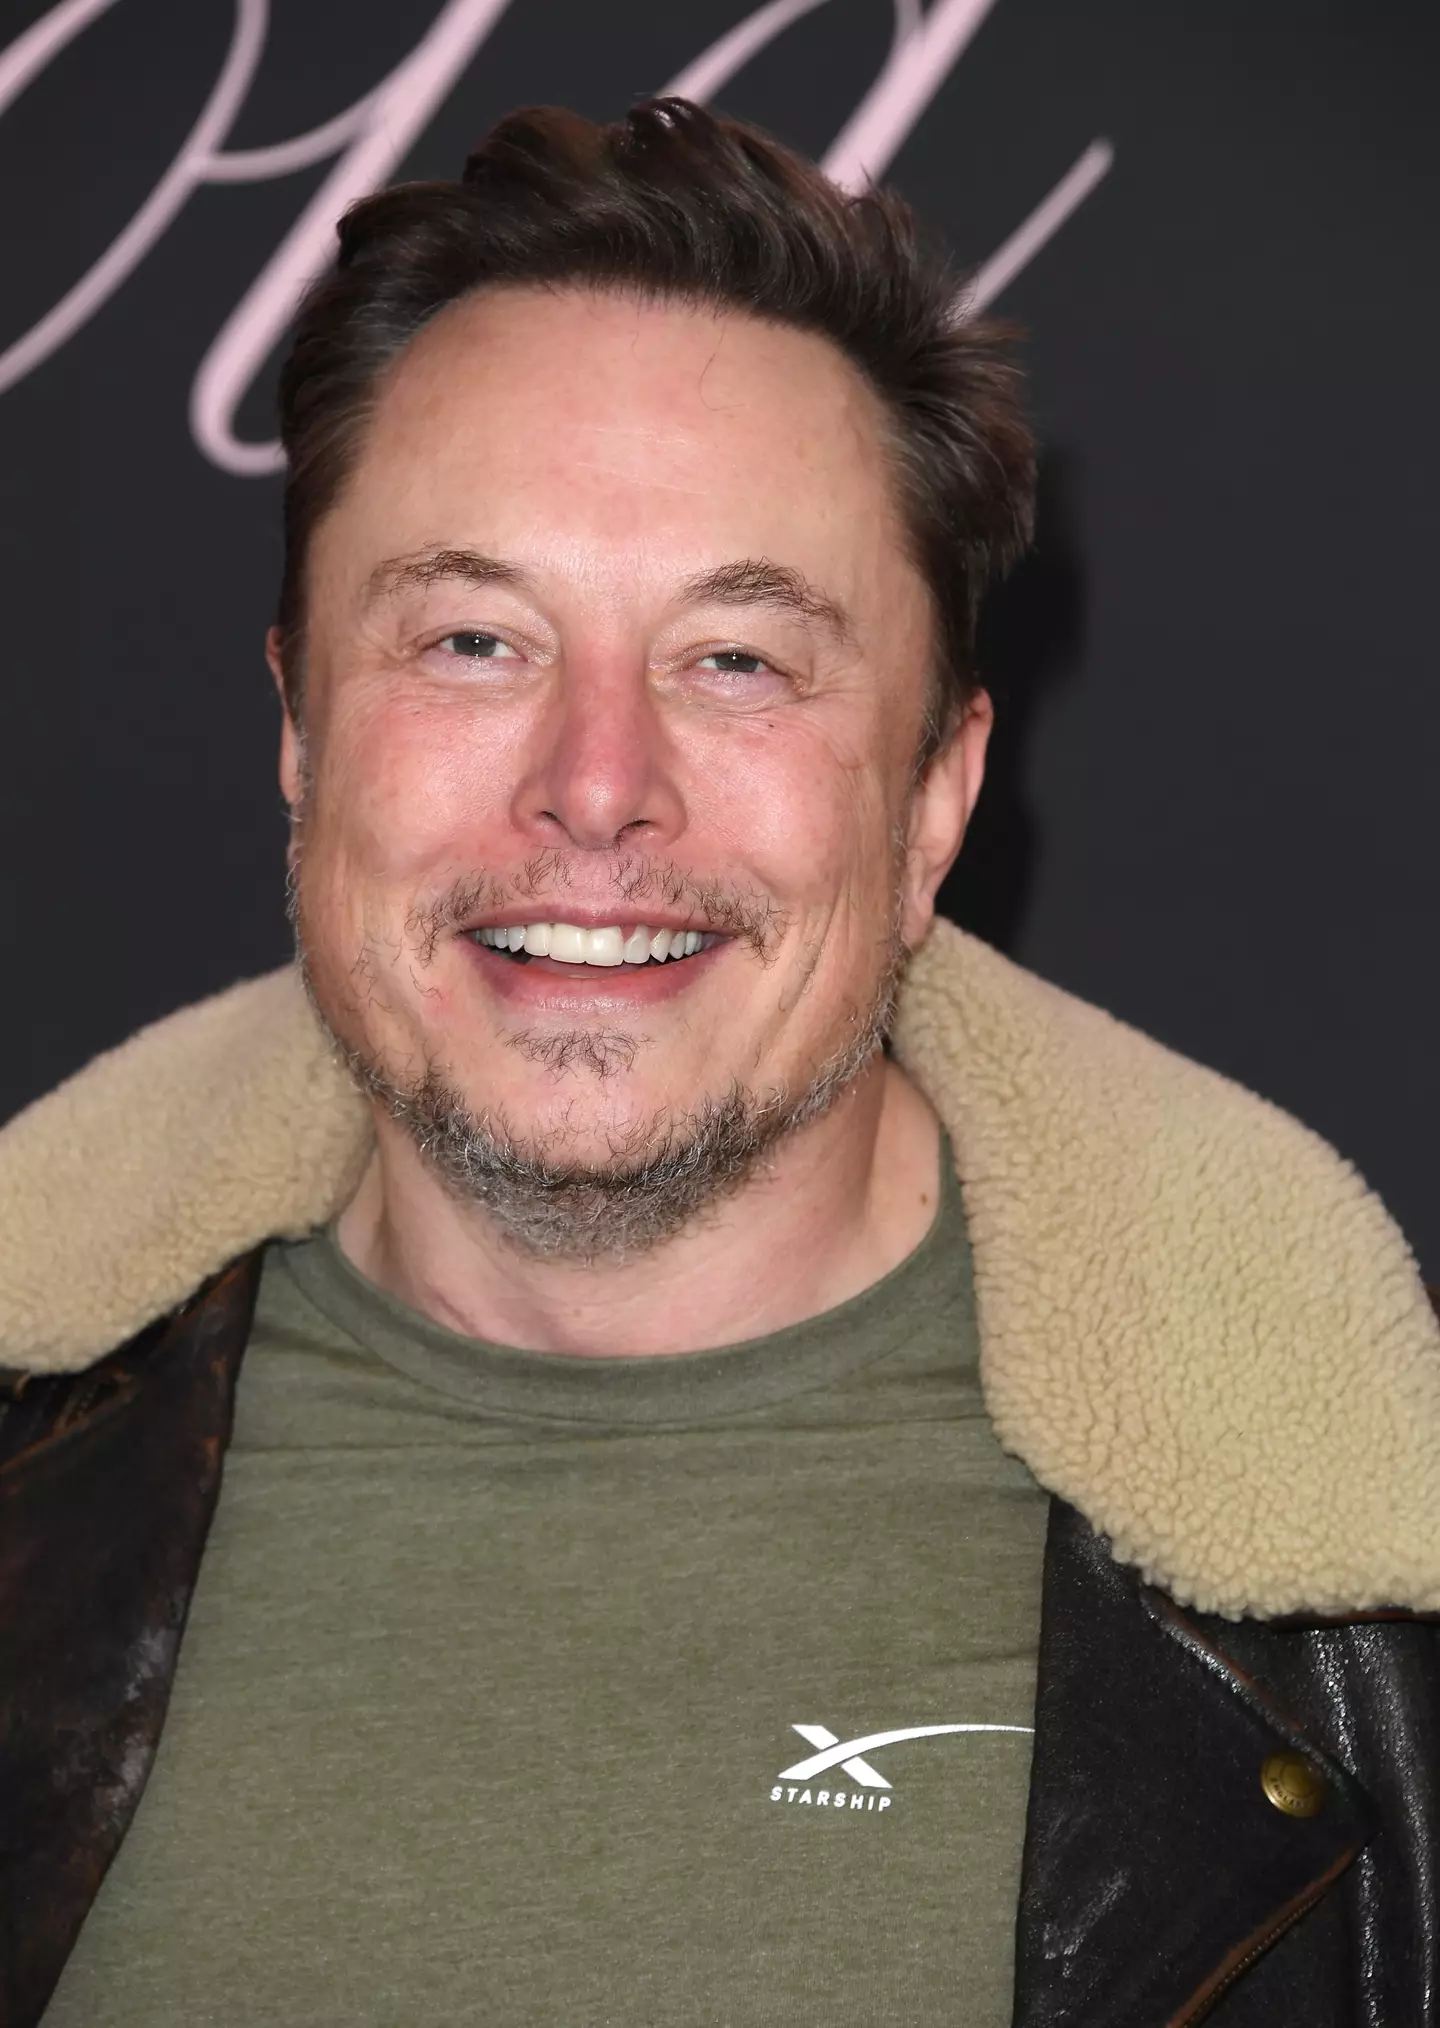 Elon Musk has managed to spark outrage with a post on X.